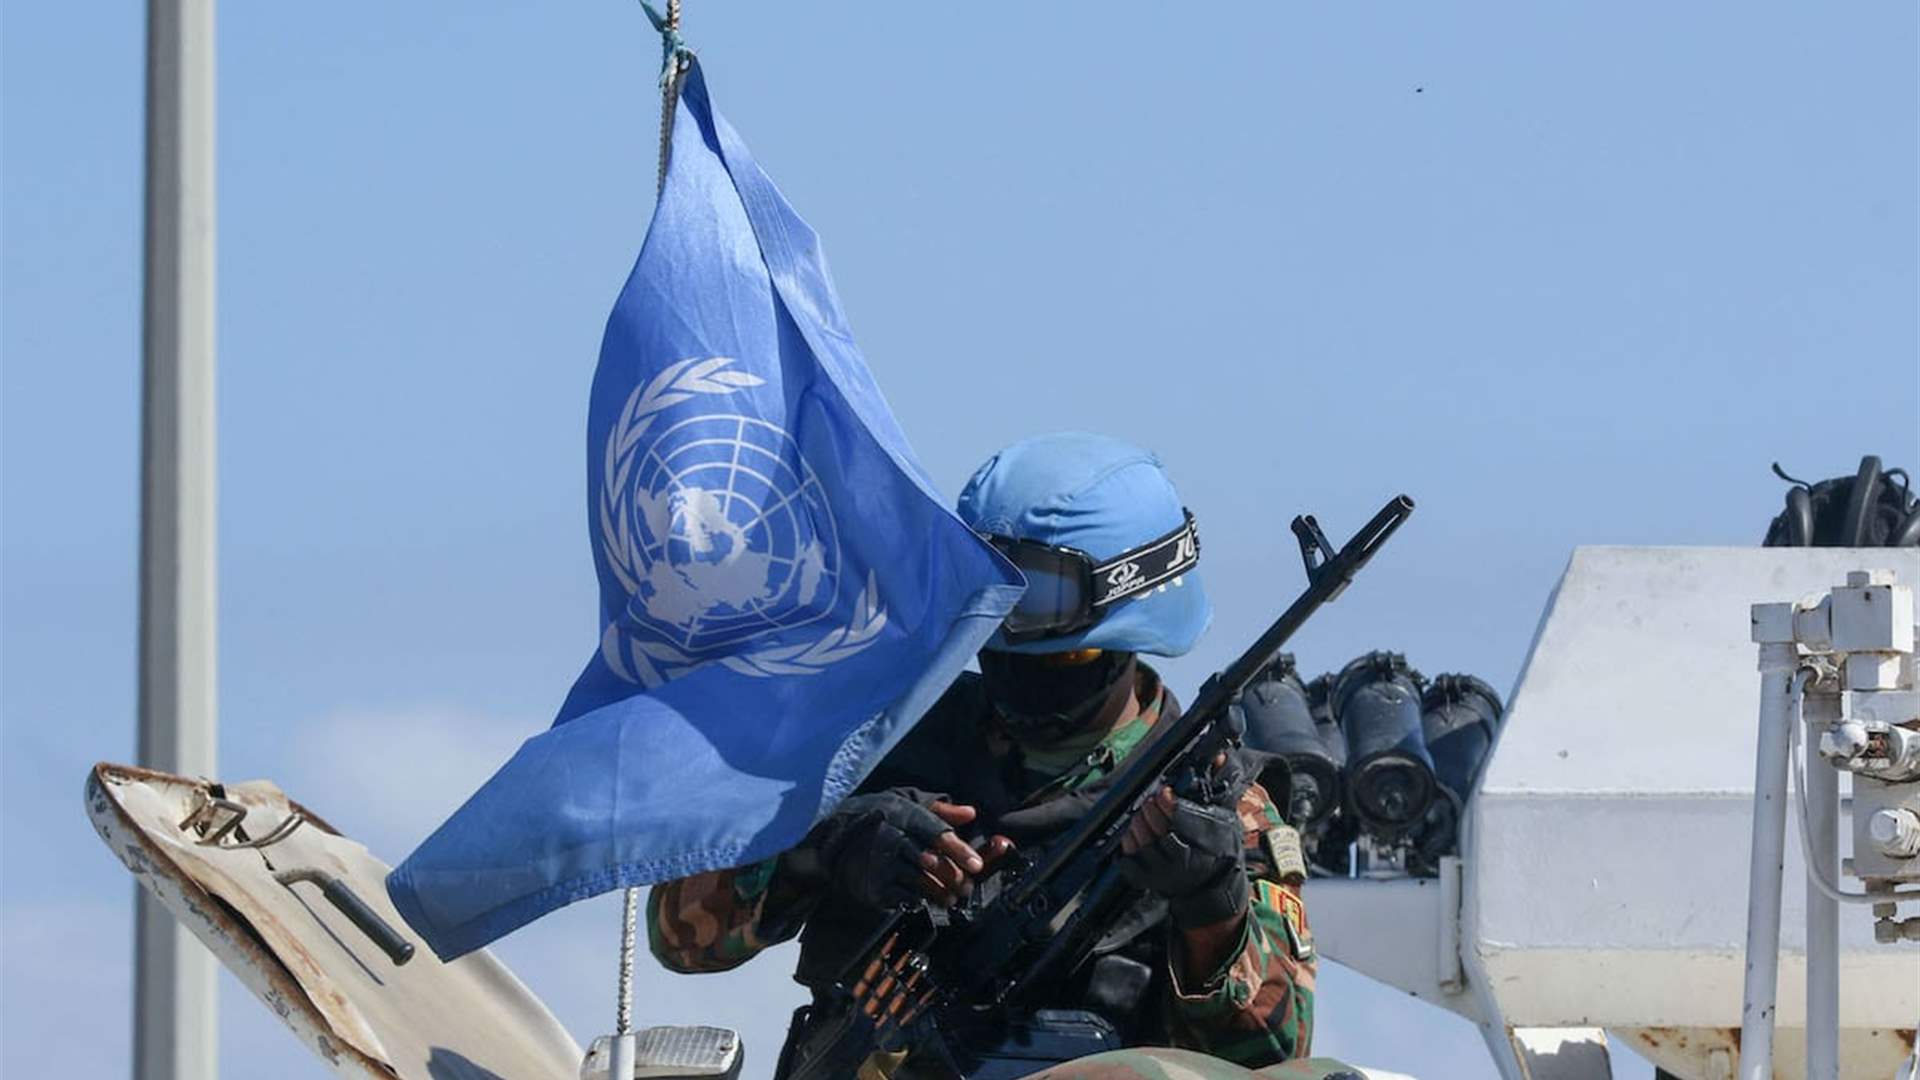 UN Peacekeeper injured in southern Lebanon: UNIFIL reports &#39;assault&#39; on patrol, urges swift investigation